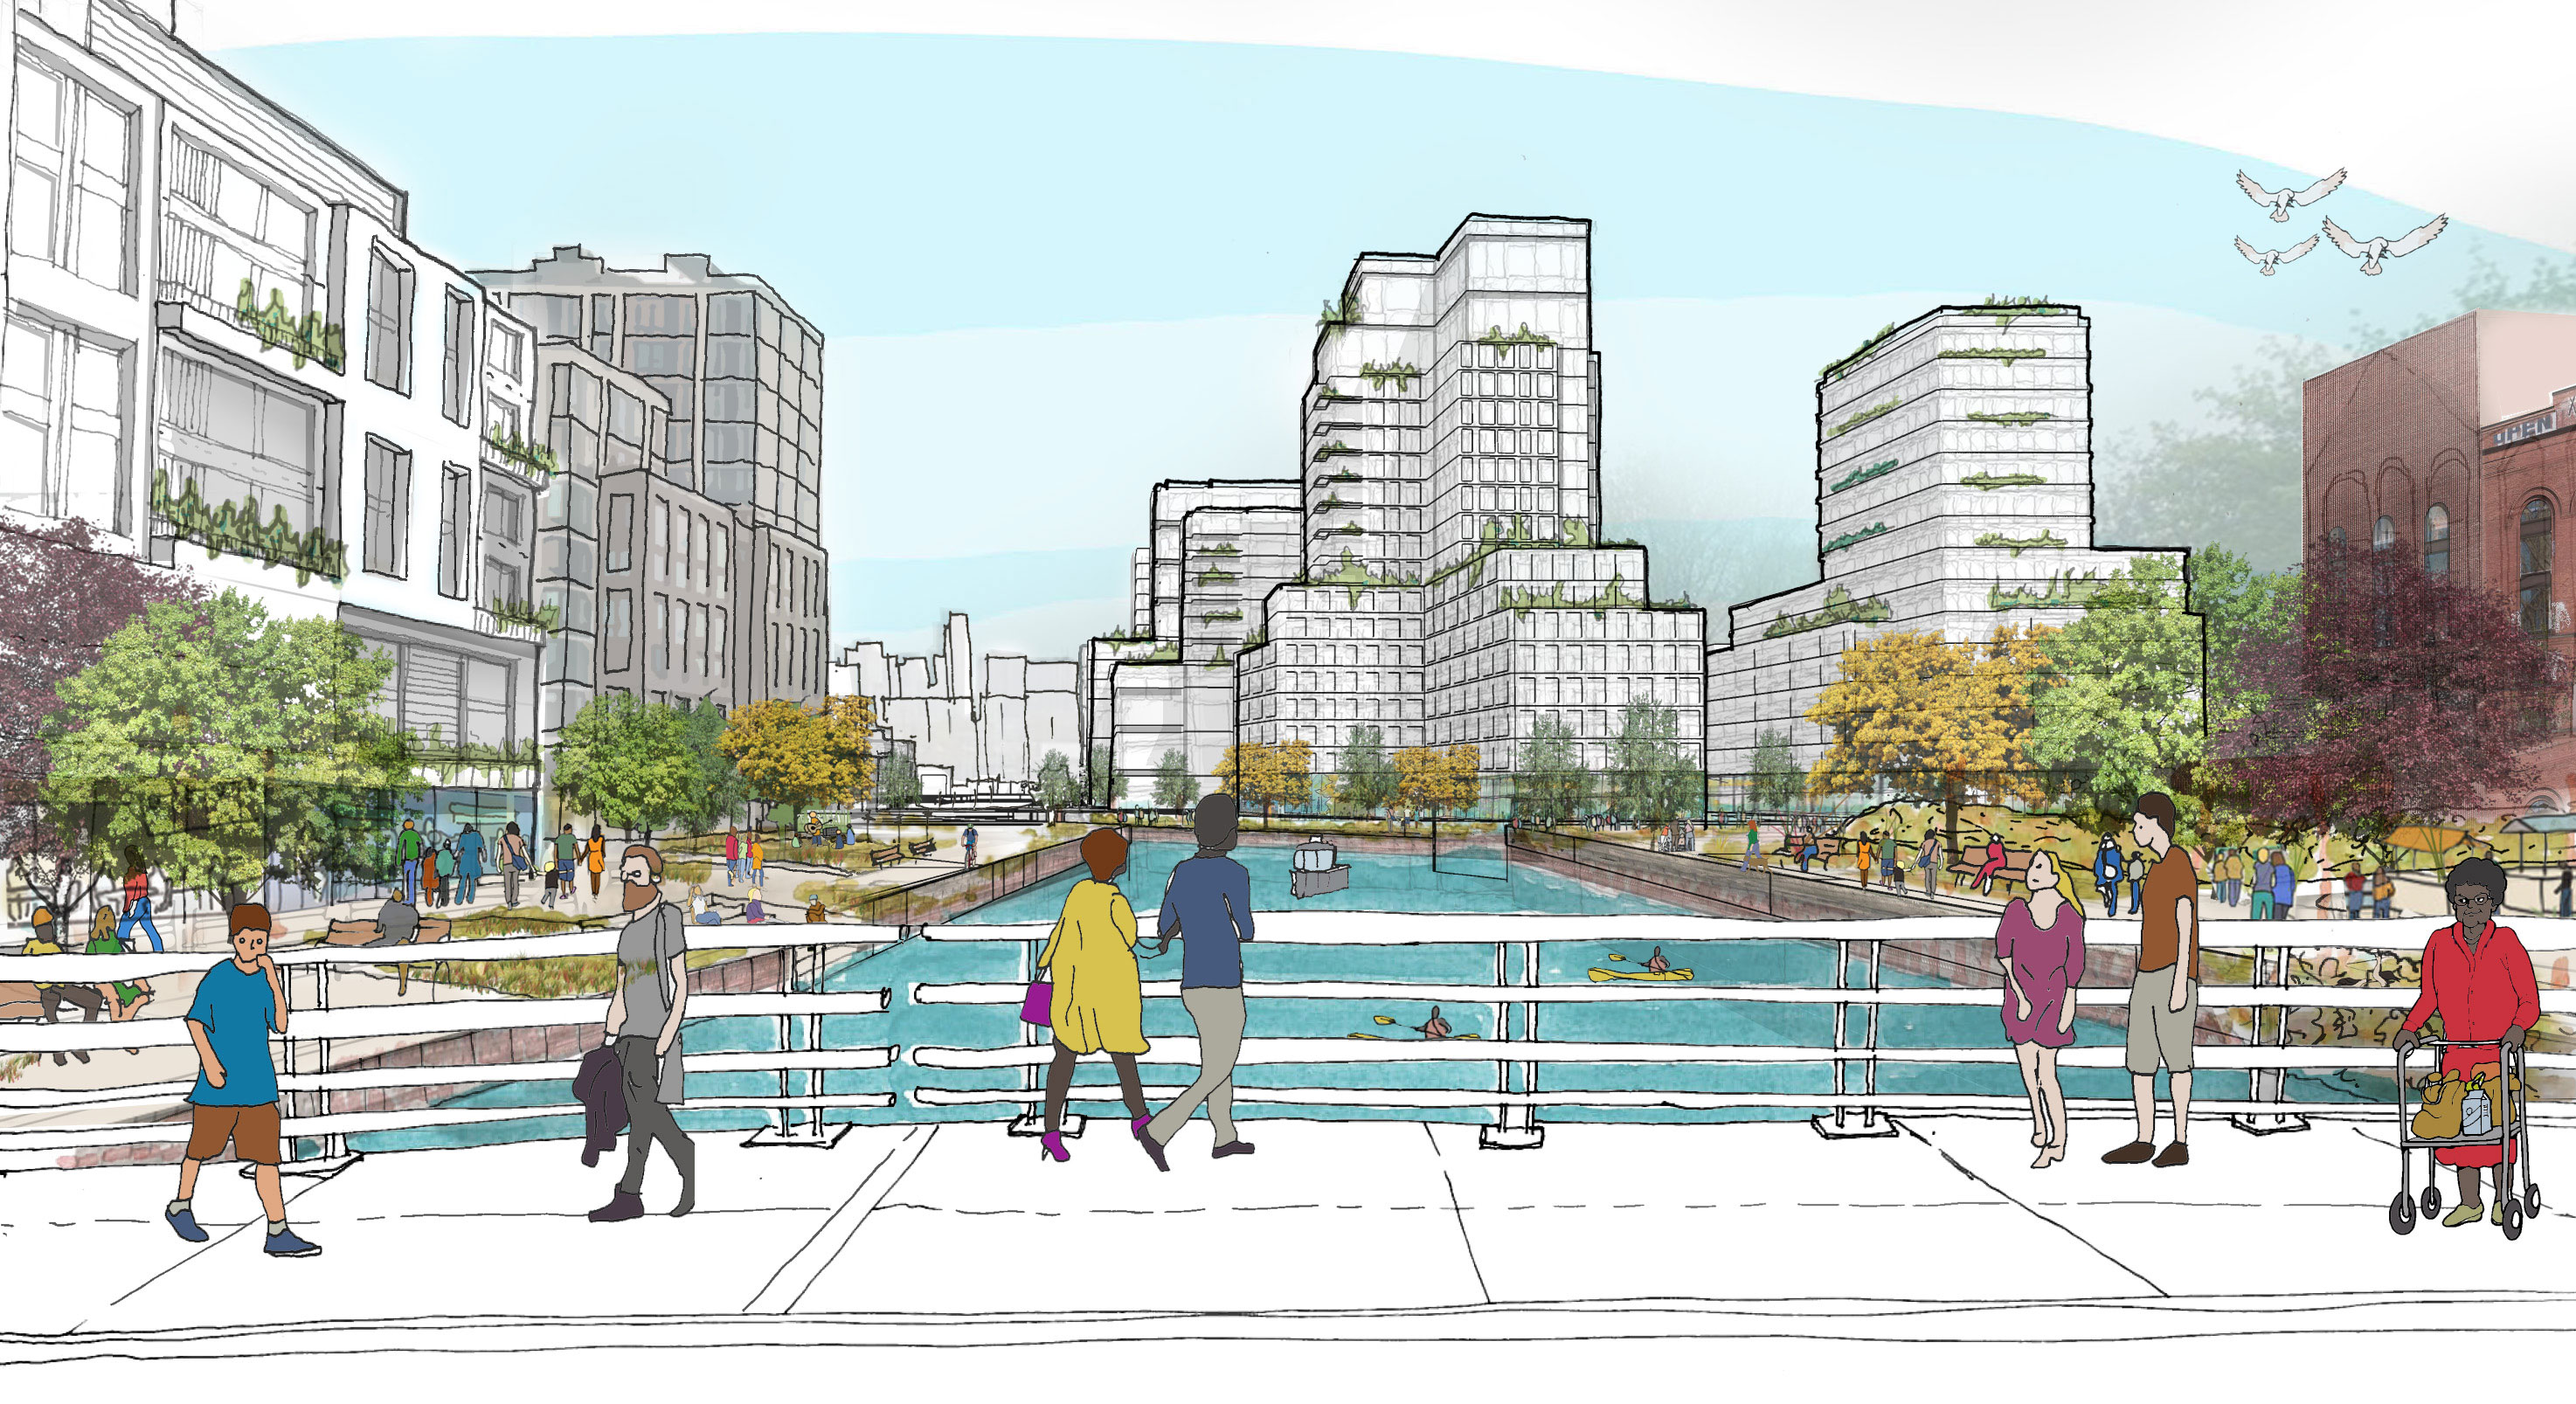 Vision sketch of Gowanus canal bridge crossing with waterfront development and pedestrian activity
